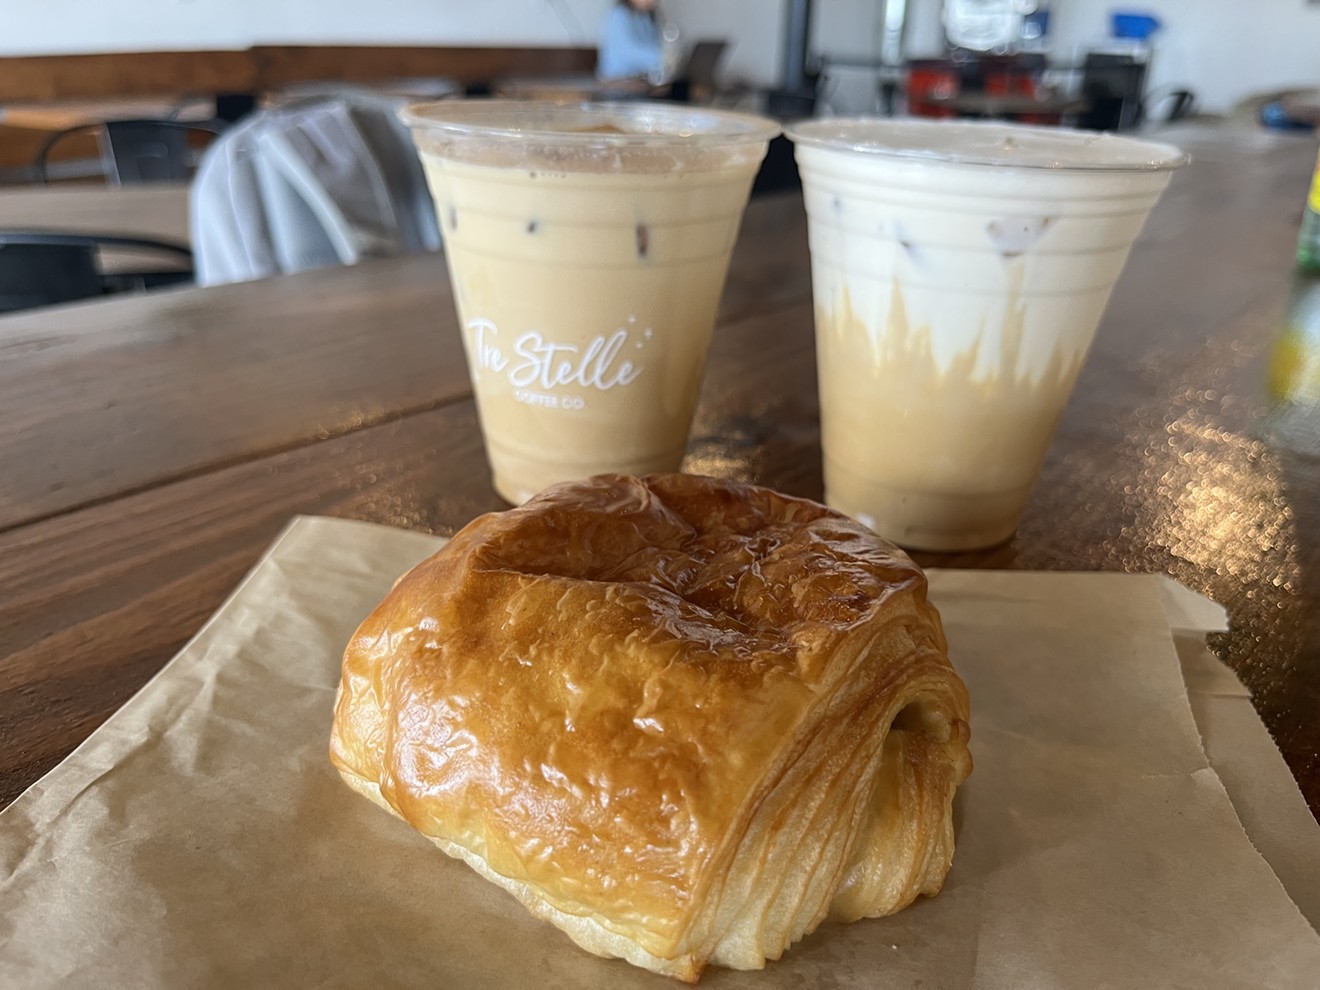 The lattes and pastries here are made fresh.